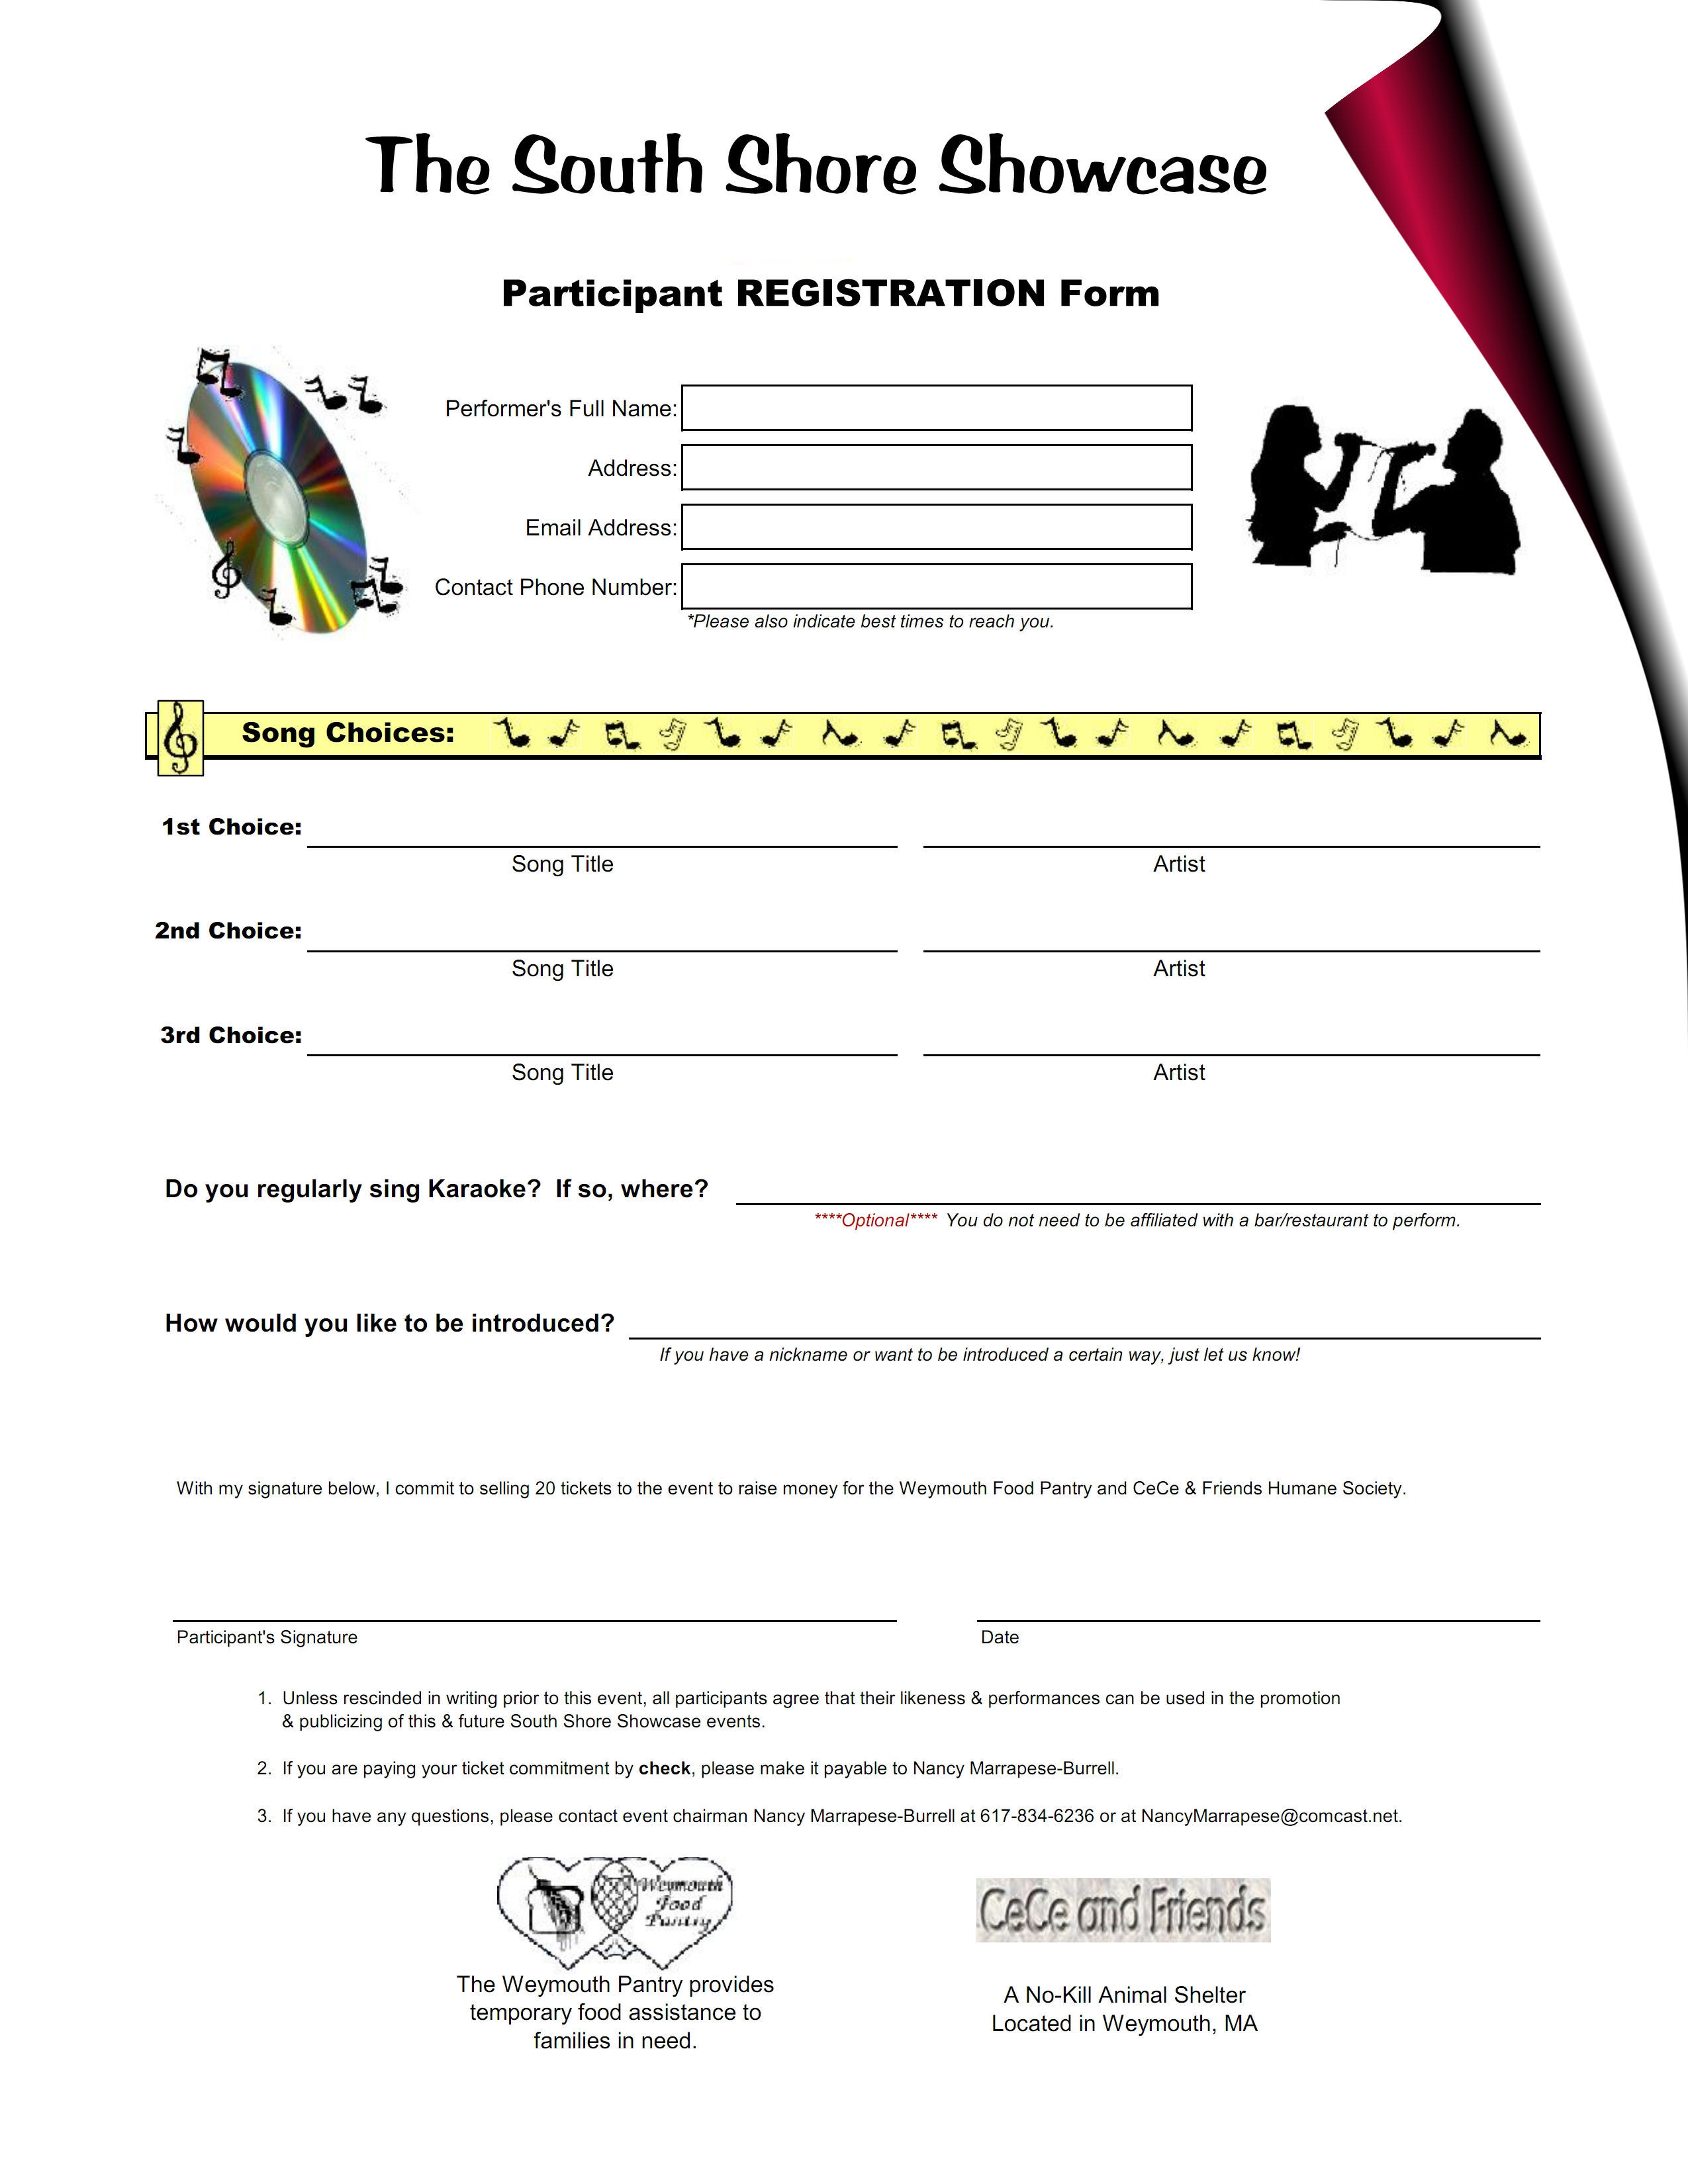 Link to Reigstration Form